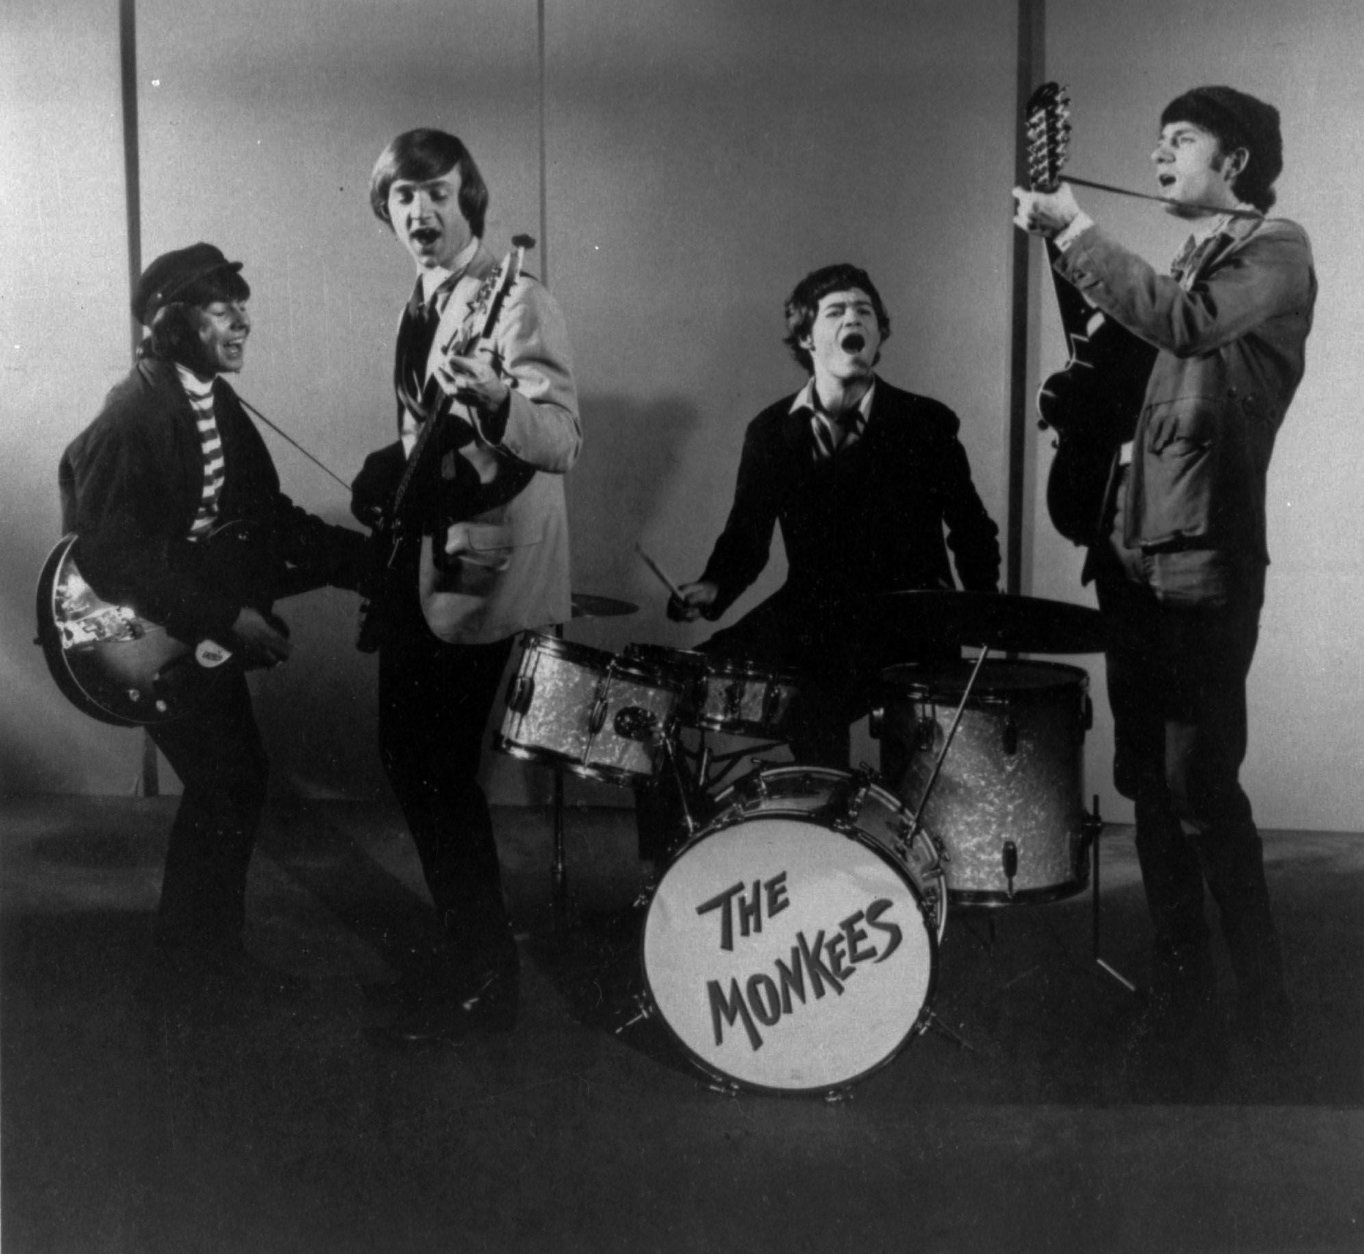 A 1966 photo of The Monkees, singing group. (AP Photo/fls)